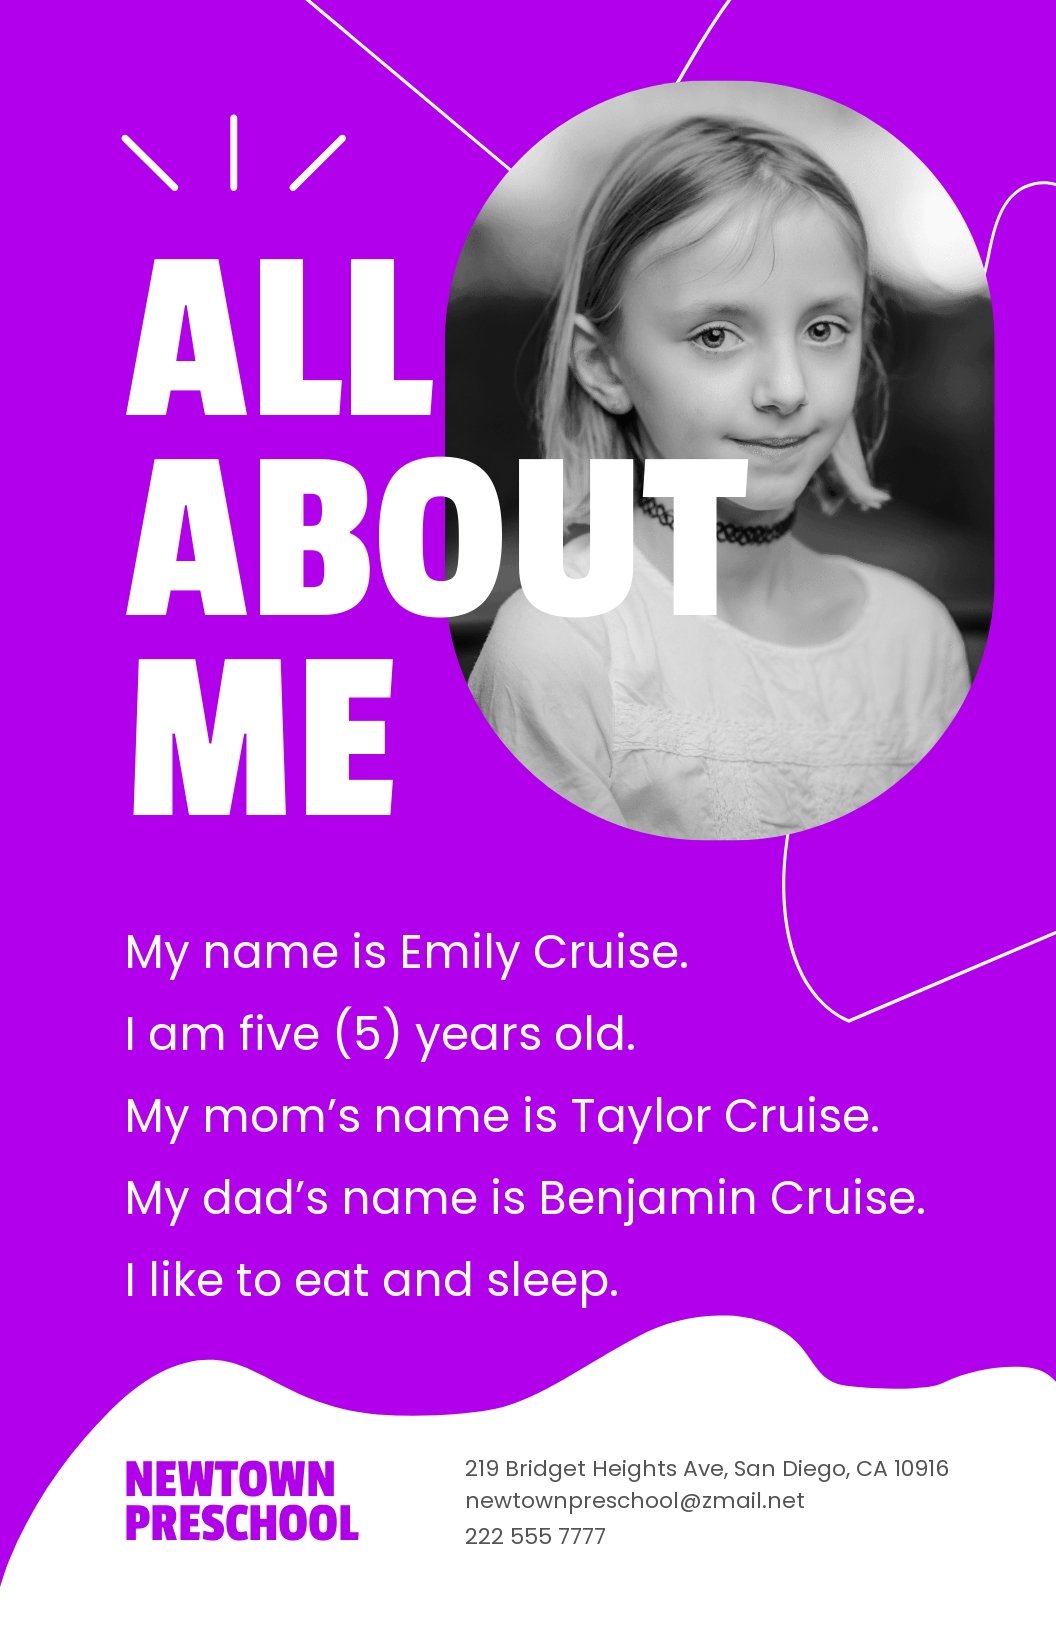 free-preschool-all-about-me-poster-download-in-png-jpg-template